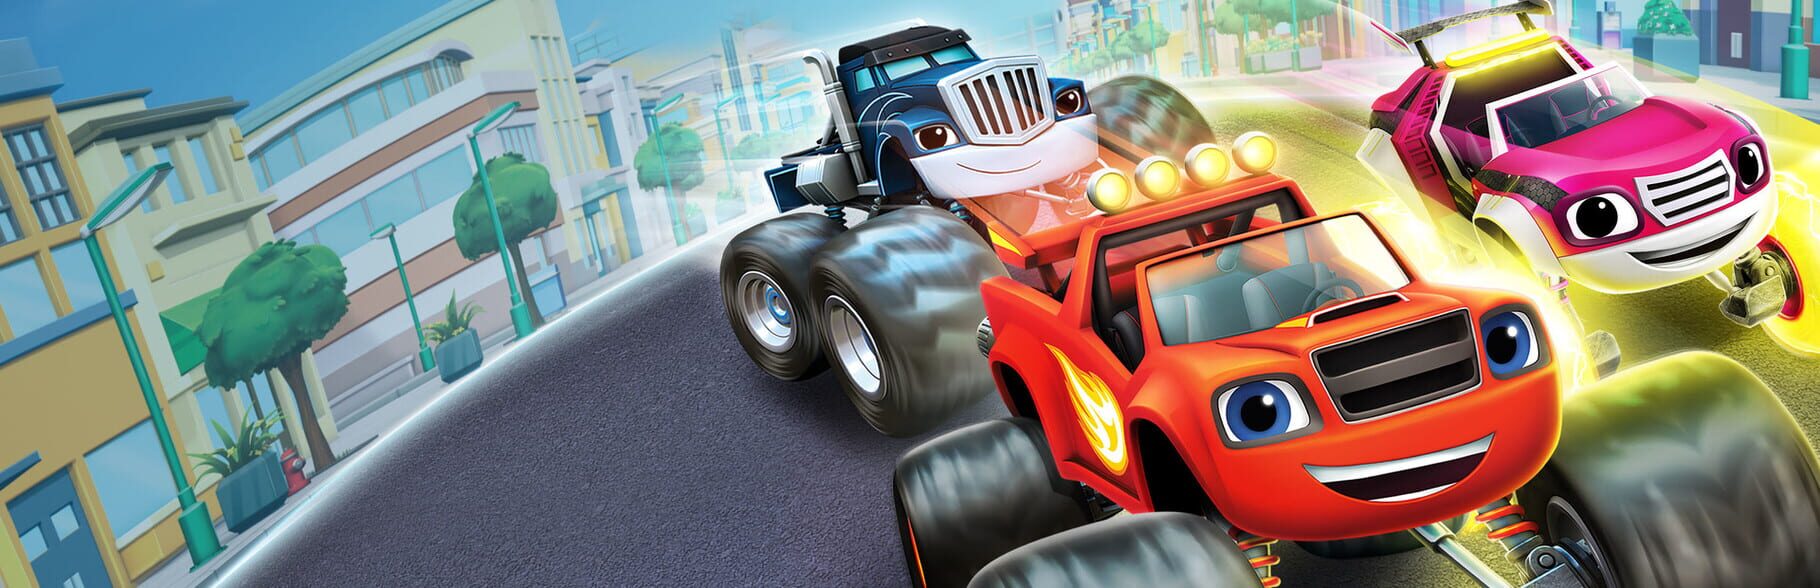 Blaze and the Monster Machines: Axle City Racers artwork